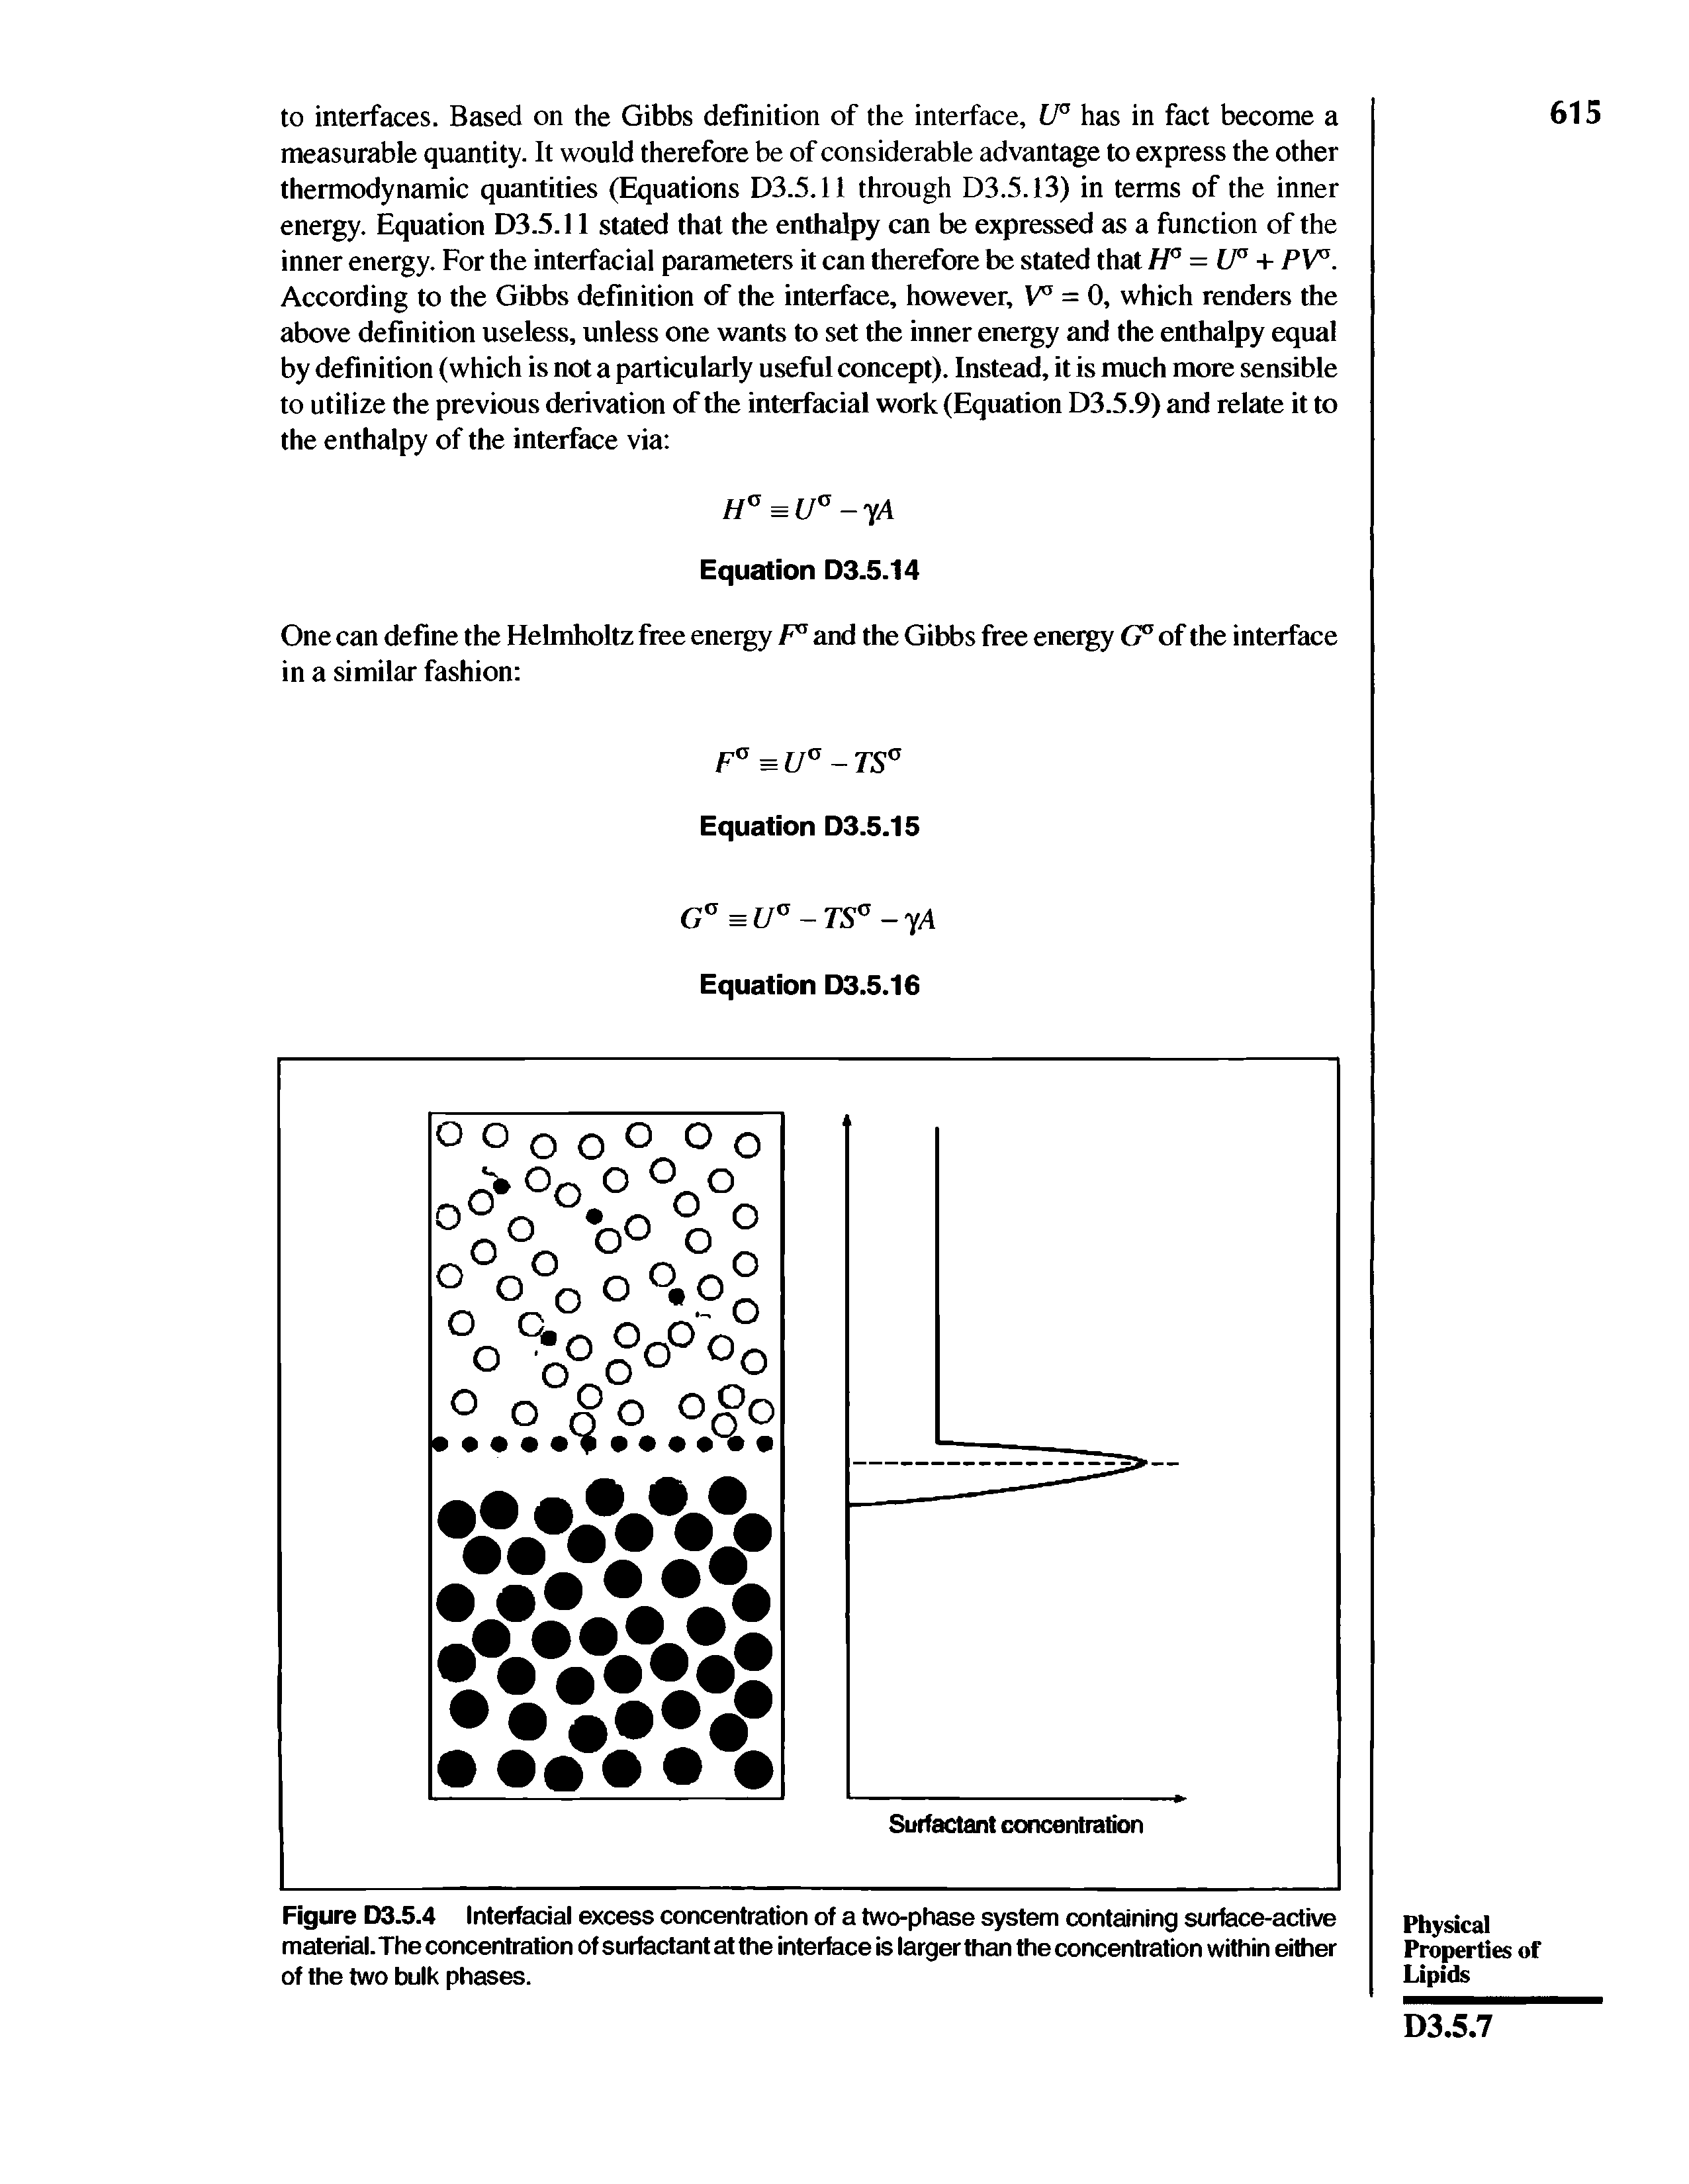 Figure D3.5.4 Interfacial excess concentration of a two-phase system containing surface-active material. The concentration of surfactant at the interface is larger than the concentration within either of the two bulk phases.